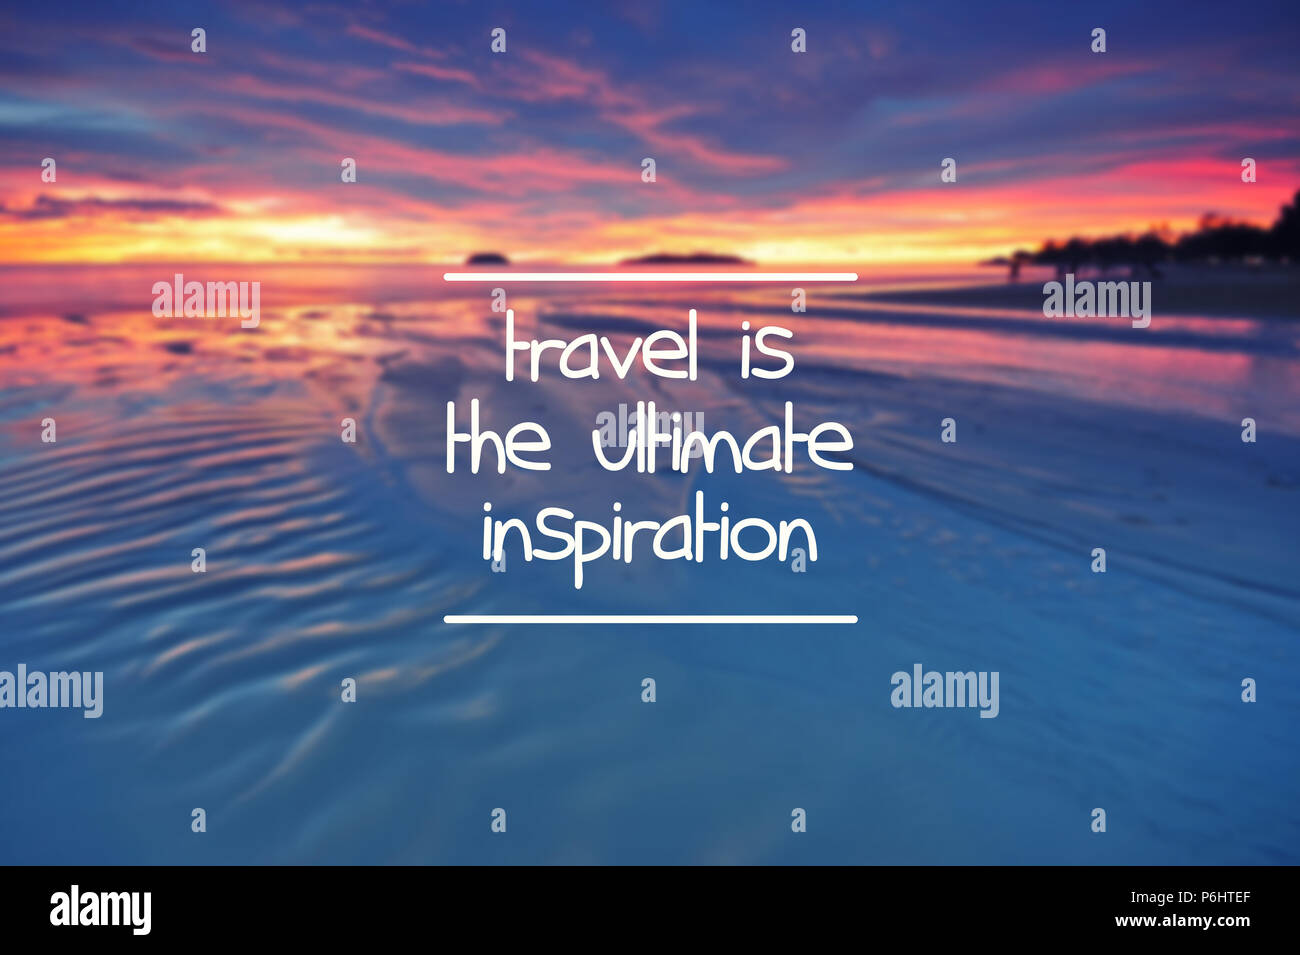 Motivational and inspiration quote- Travel is the ultimate inspiration. Retro style Stock Photo